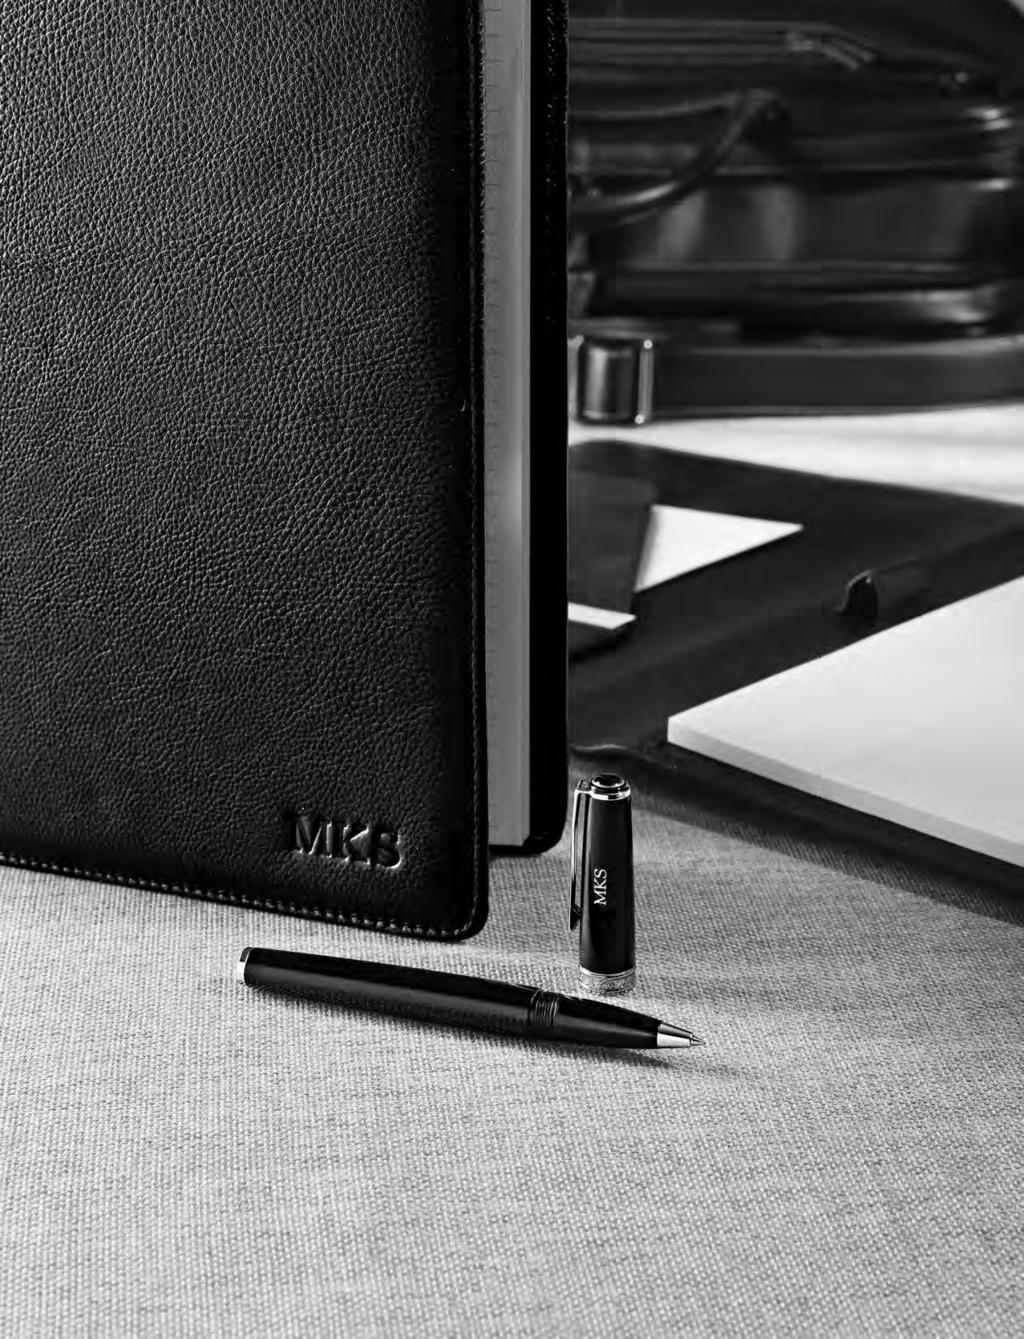 Executive Decisions The Executive Ensemble includes a complimentary monogram on both the portfolio and pen ENJOY 20 % OFF your purchase of $100 or more* Use Promotion Code CAM2016 Valid Through